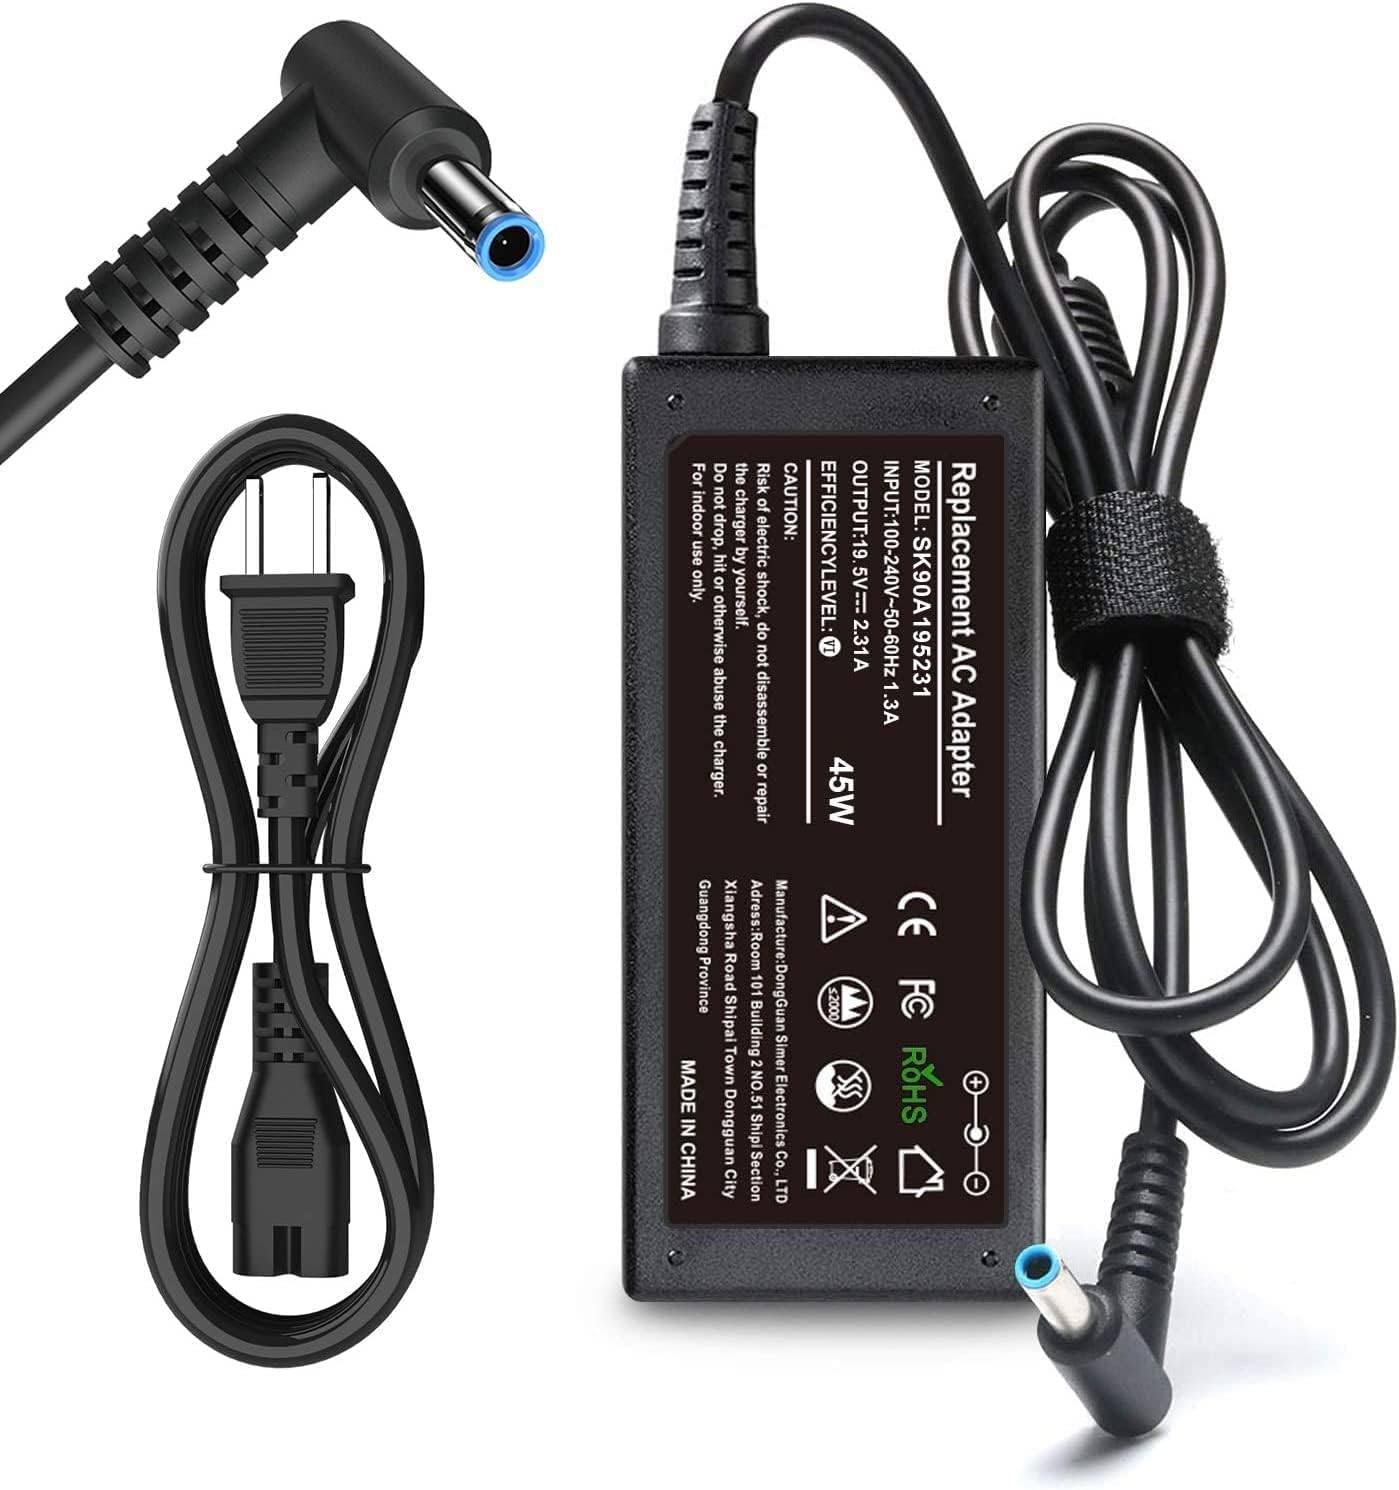 Limited-Time Discounts! HP 45W 19.5V 2.31A for HP Laptop Charger Blue Tip - Claim Yours Now!